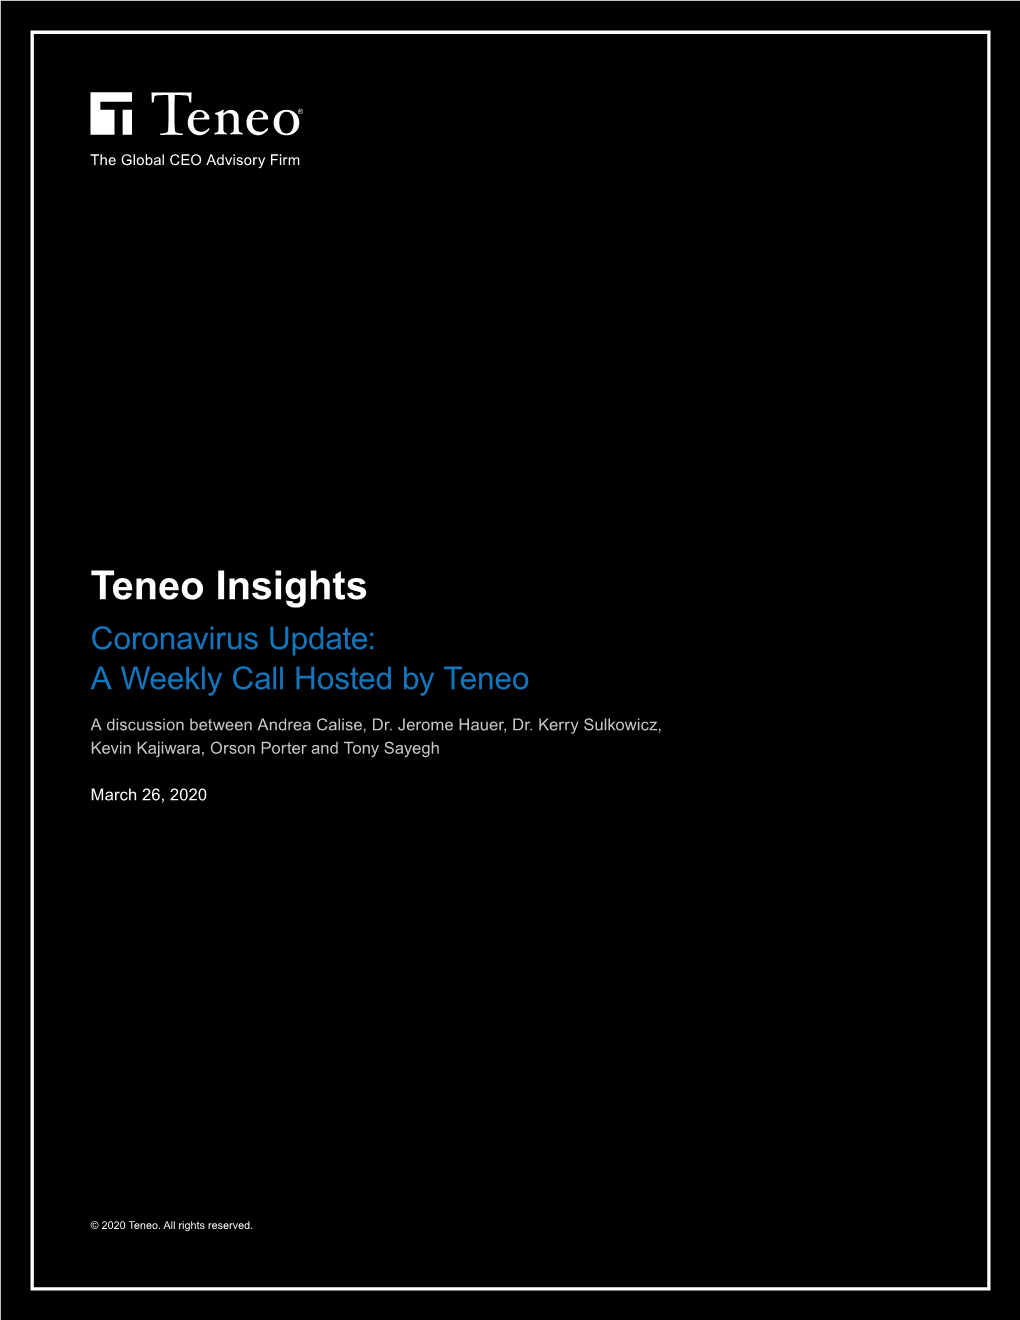 Teneo Insights Coronavirus Update: a Weekly Call Hosted by Teneo